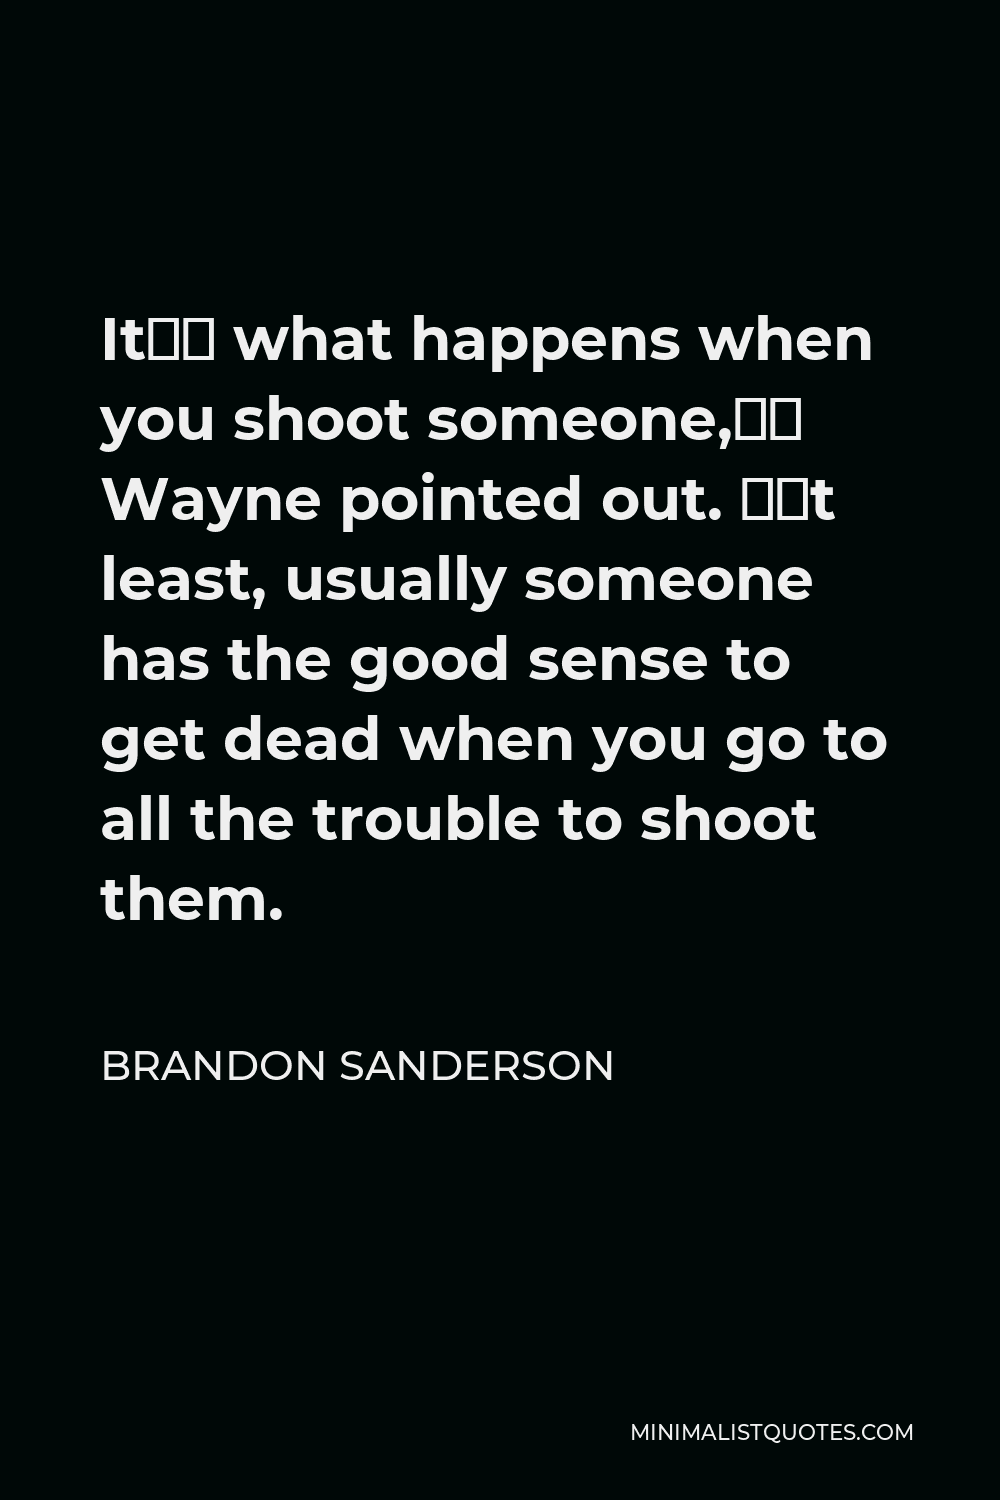 Brandon Sanderson Quote - It’s what happens when you shoot someone,” Wayne pointed out. “At least, usually someone has the good sense to get dead when you go to all the trouble to shoot them.